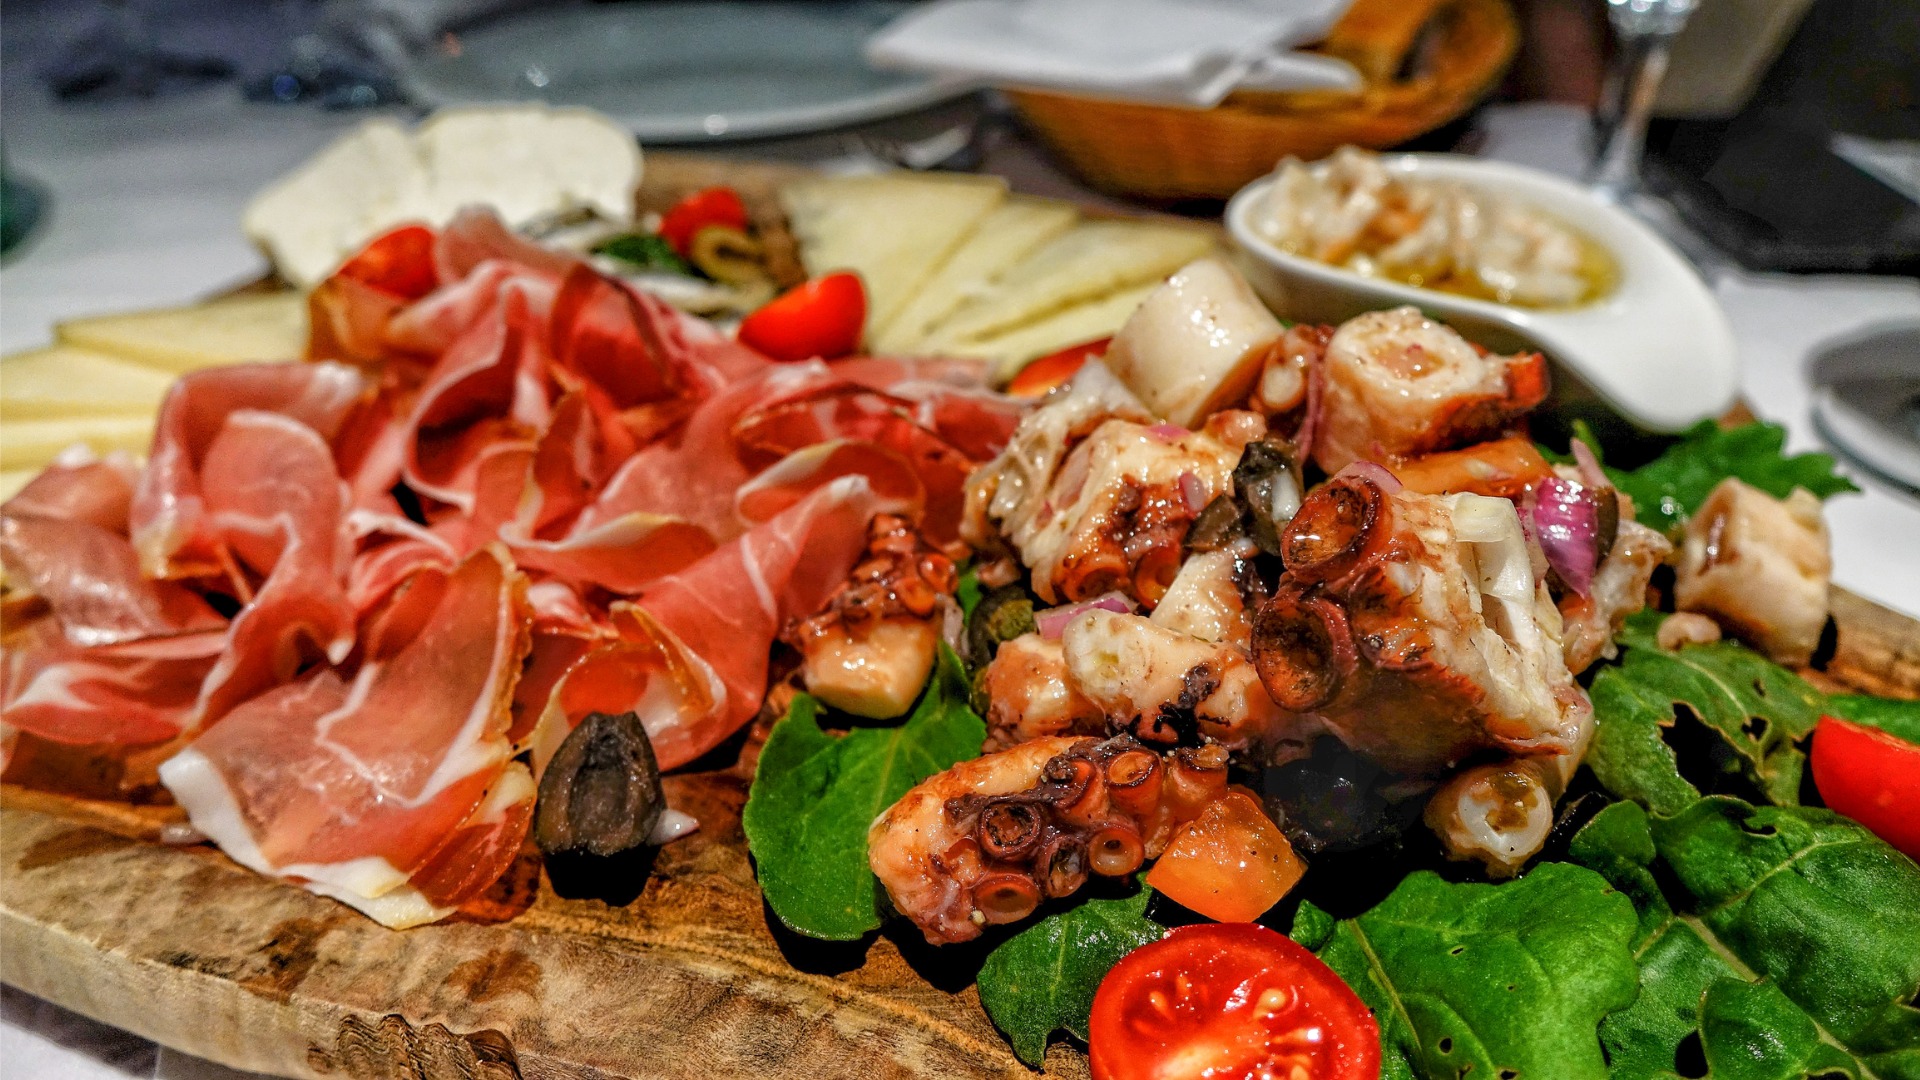 This image shows a platter filled with prsut, octopus, and cheese.